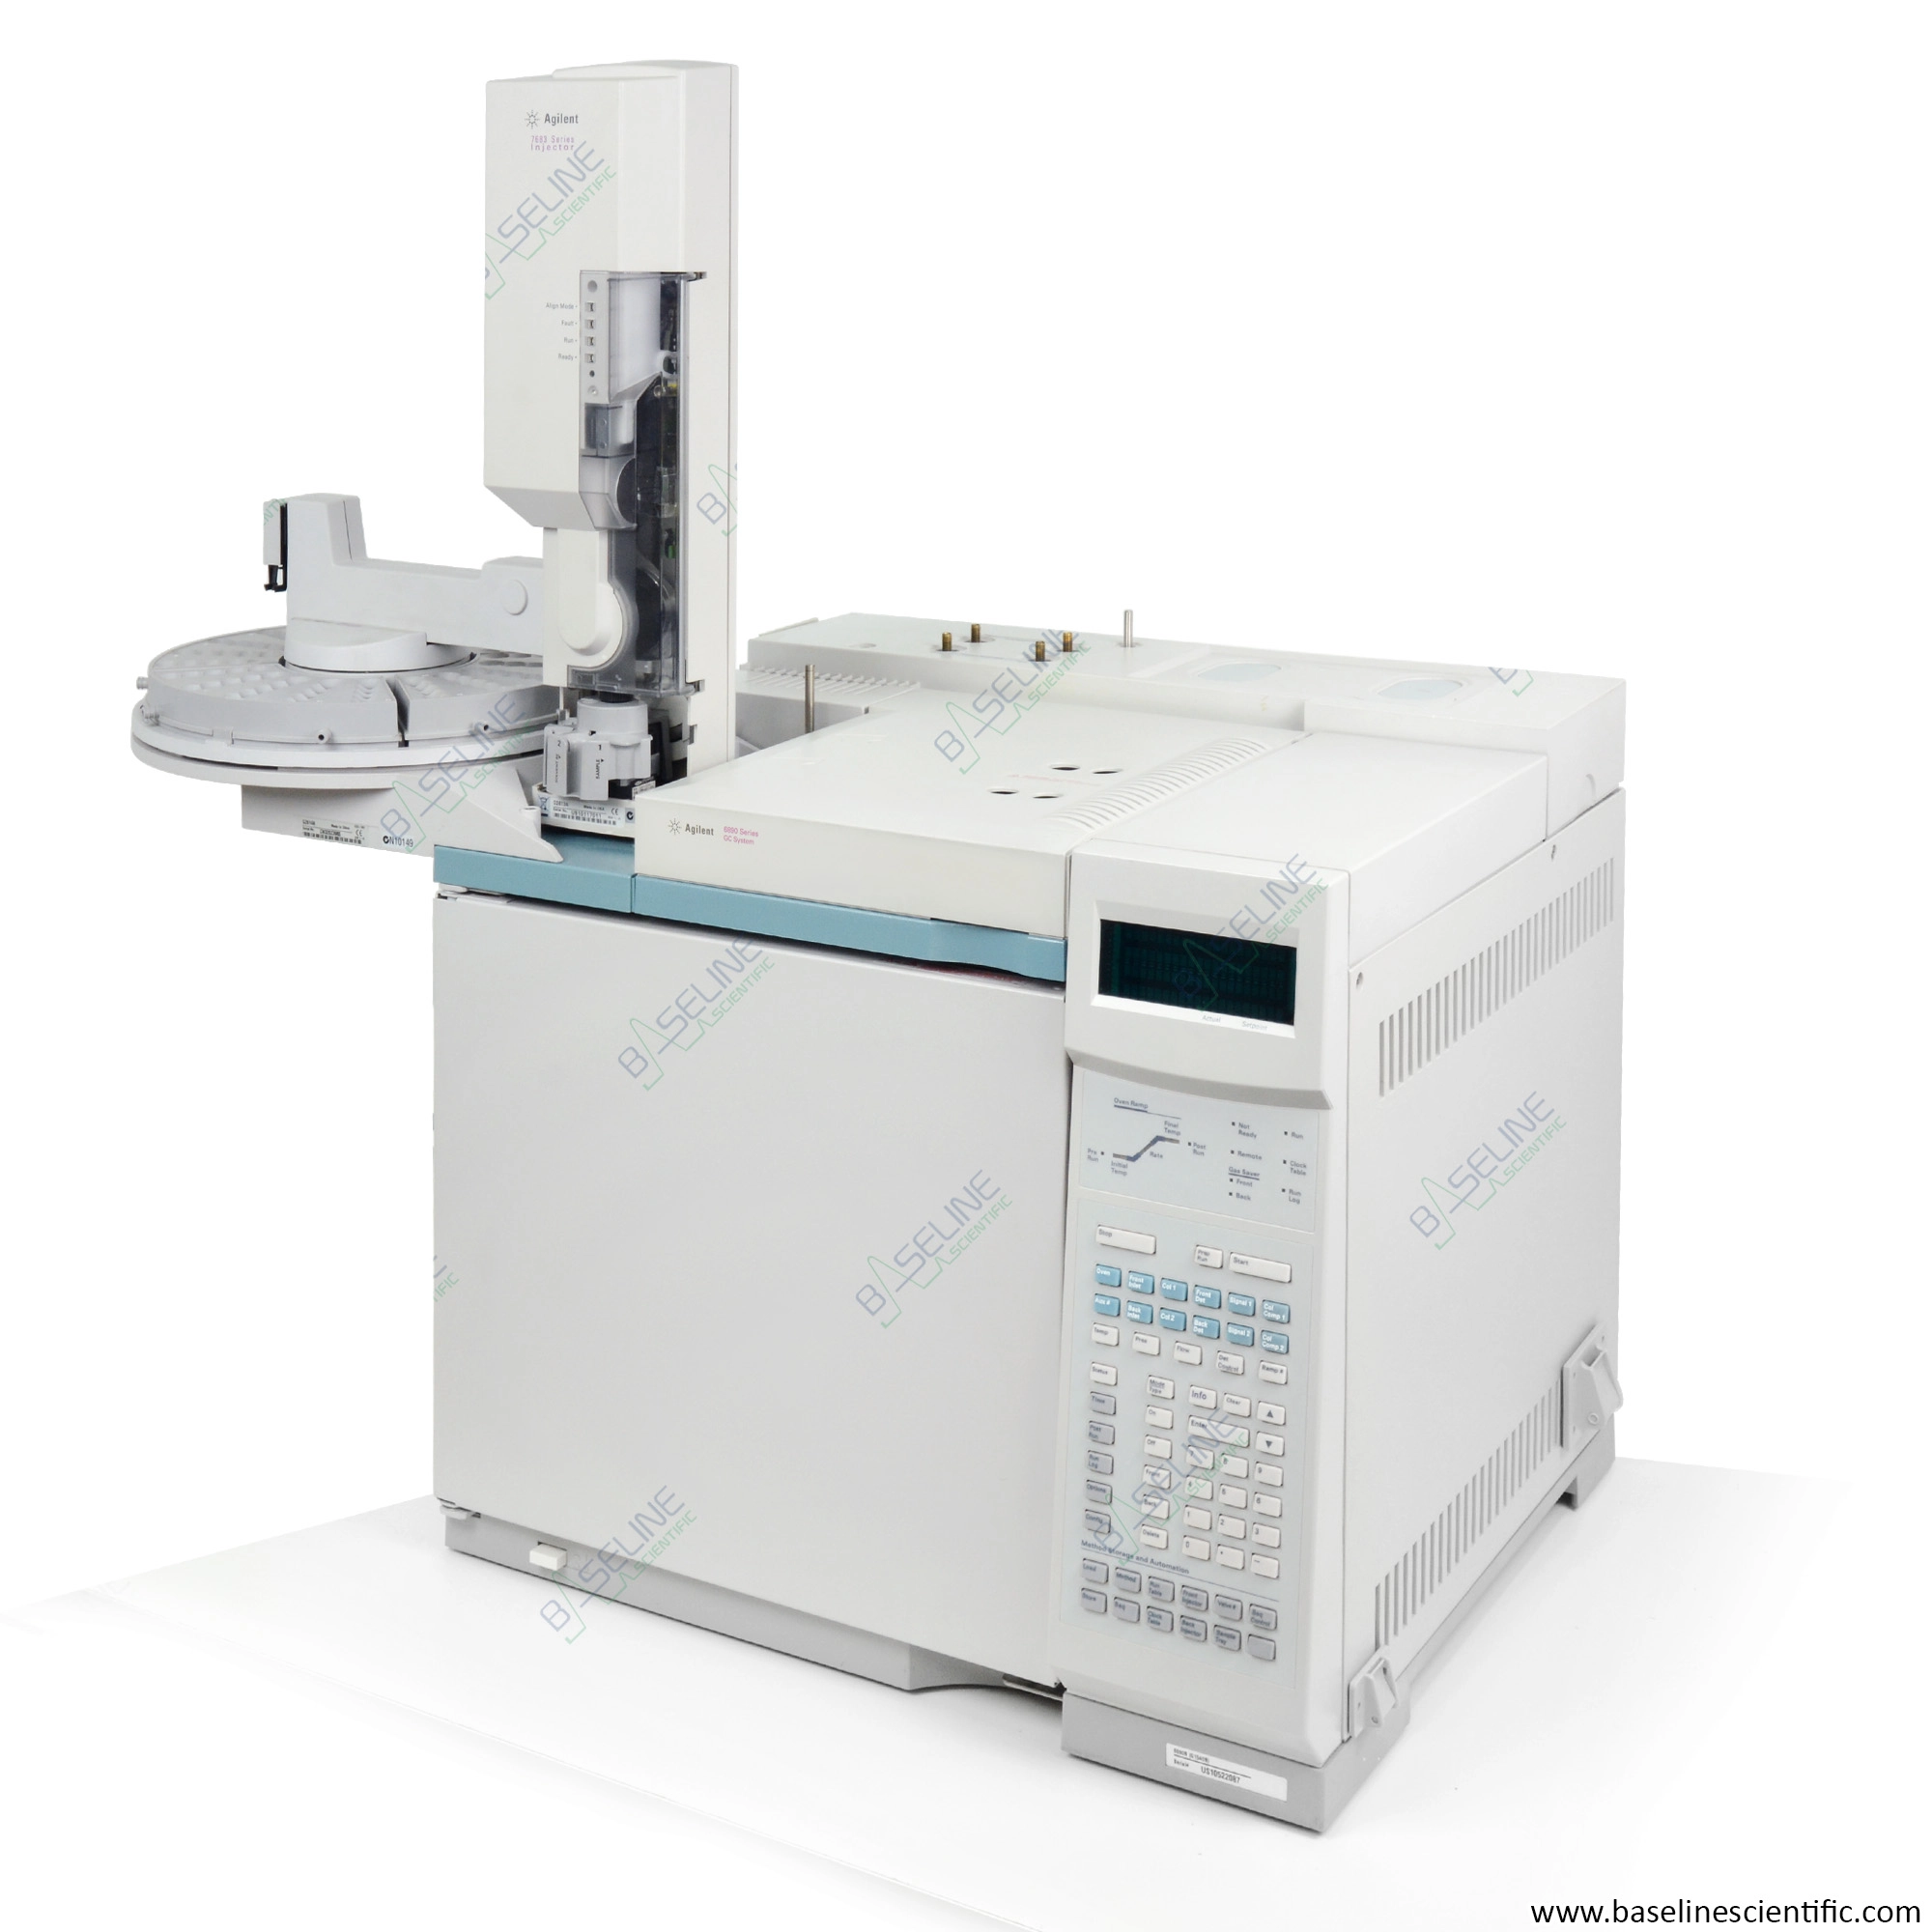 Agilent 6890 GC with Single SSL, NPD and 7683 Series Autosampler